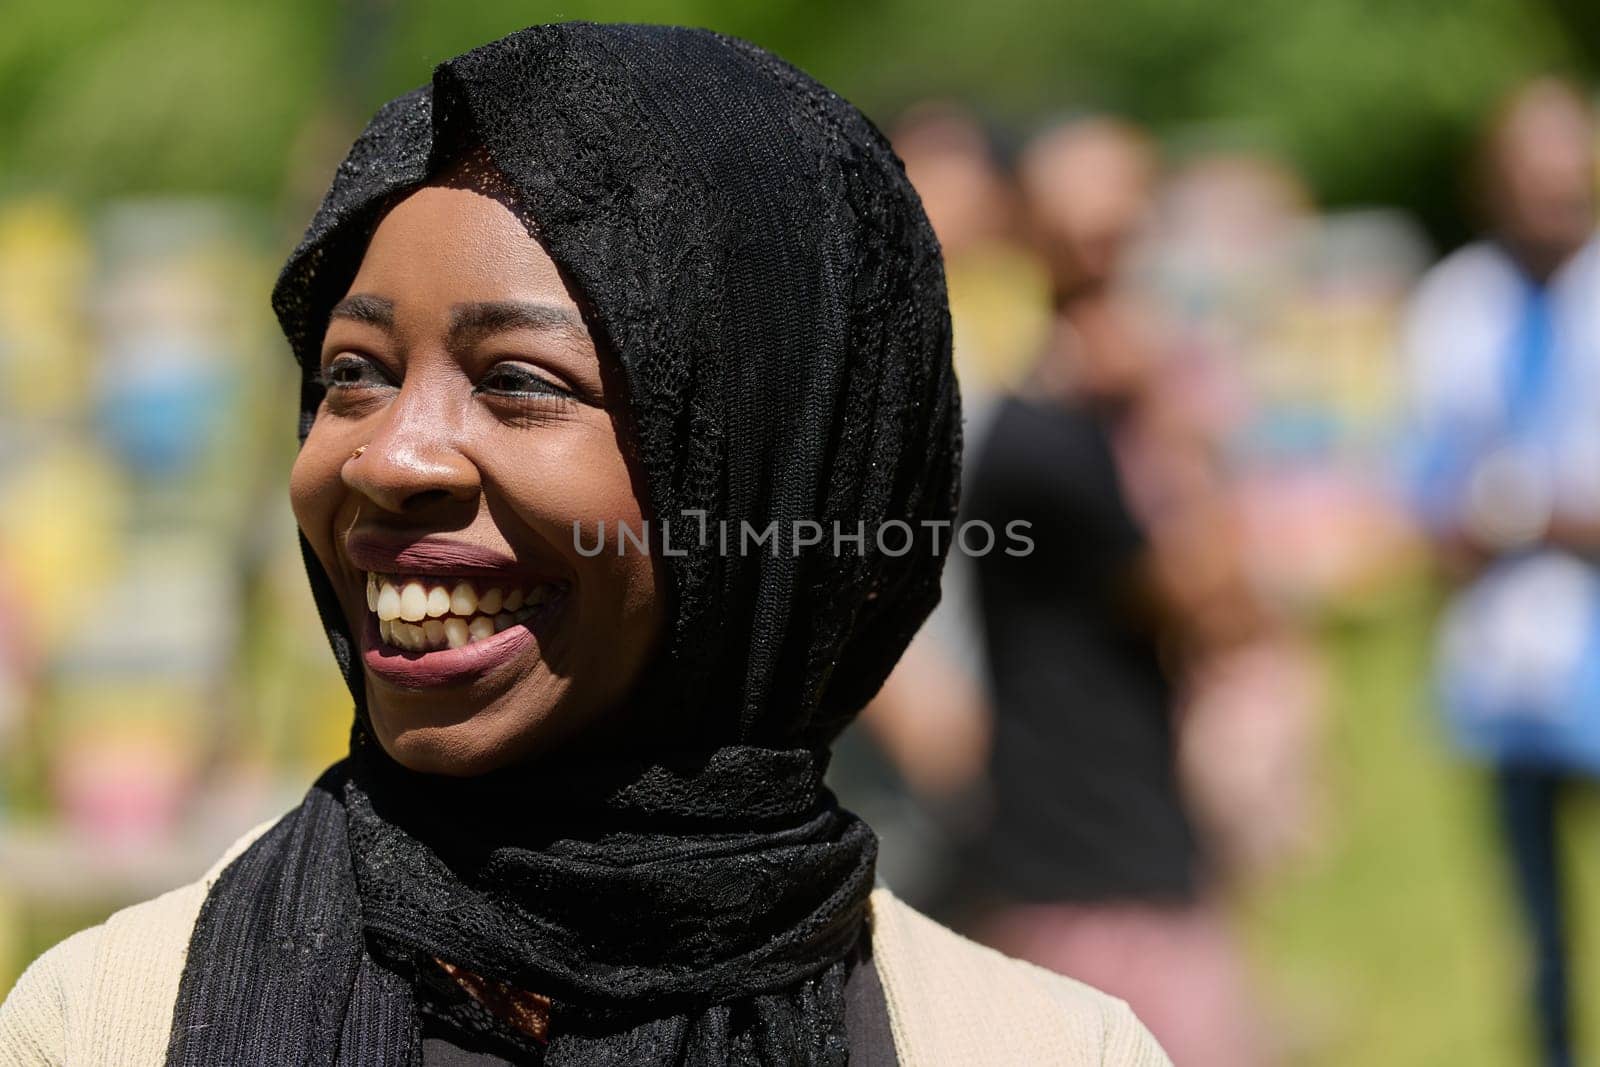 A Middle Eastern Muslim woman in a hijab beams with a radiant smile in a picturesque natural apiary, exuding joy and harmony